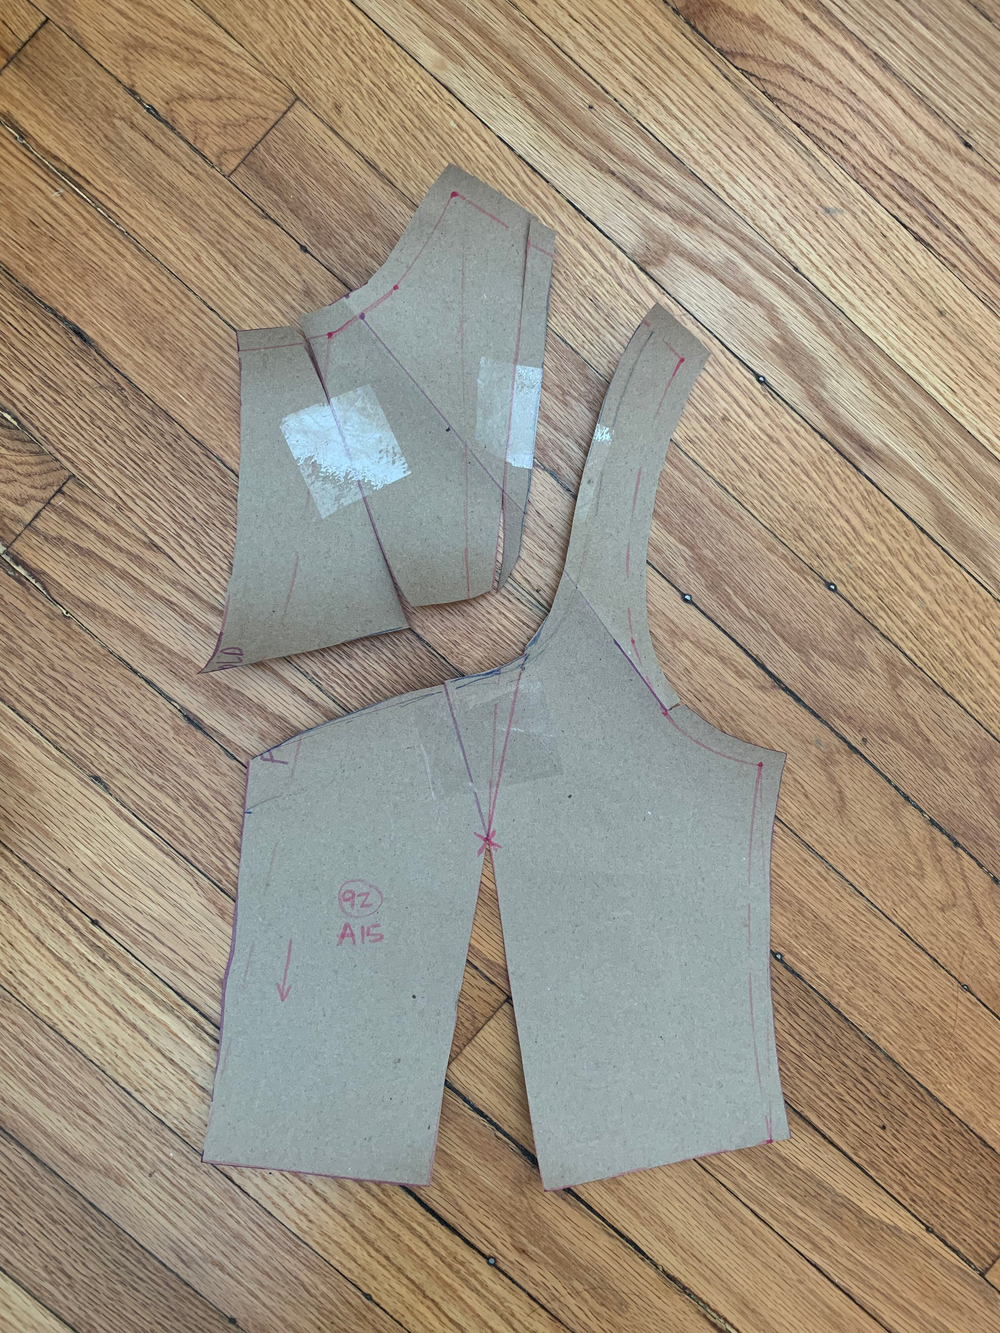 Cutting away a deeper neckline in the front bodice